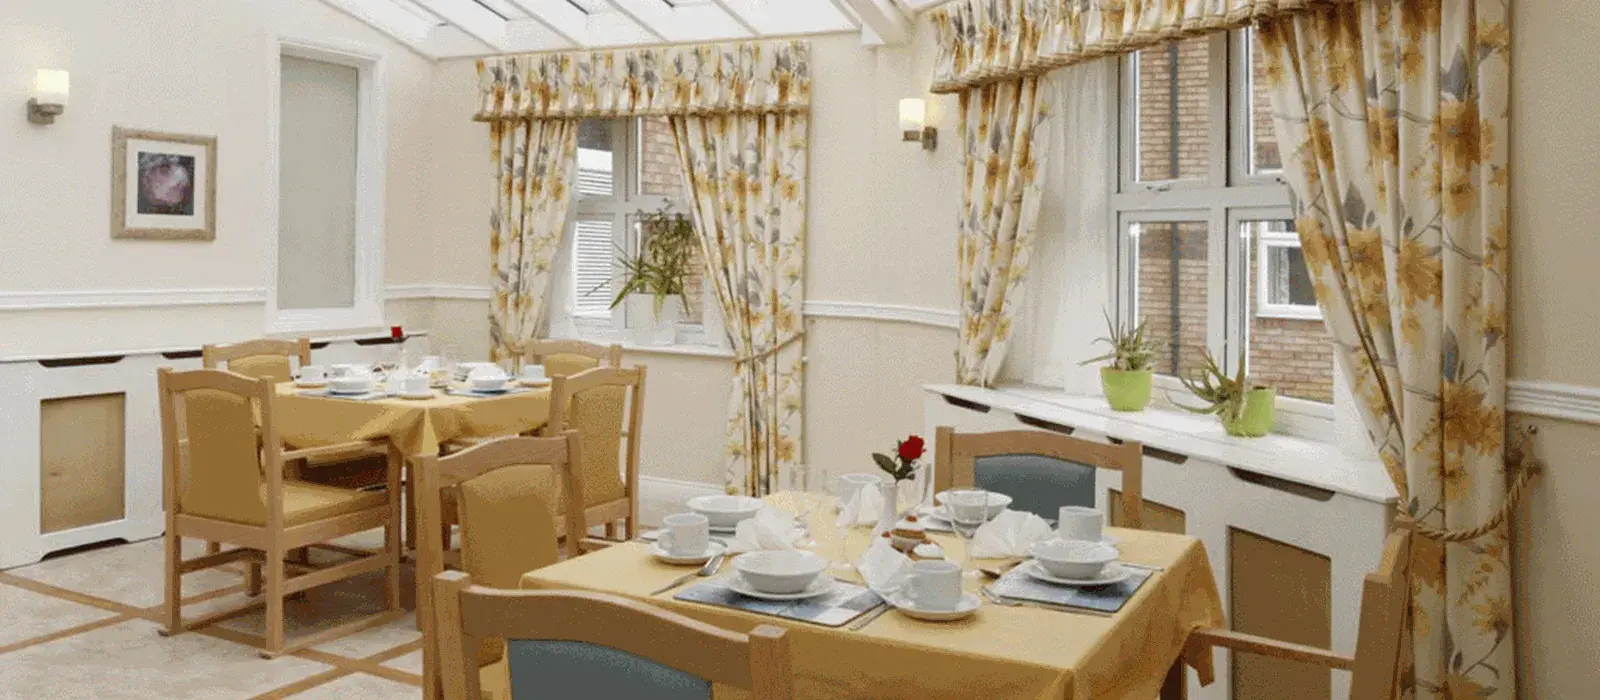 Brockwell Court care home dining room